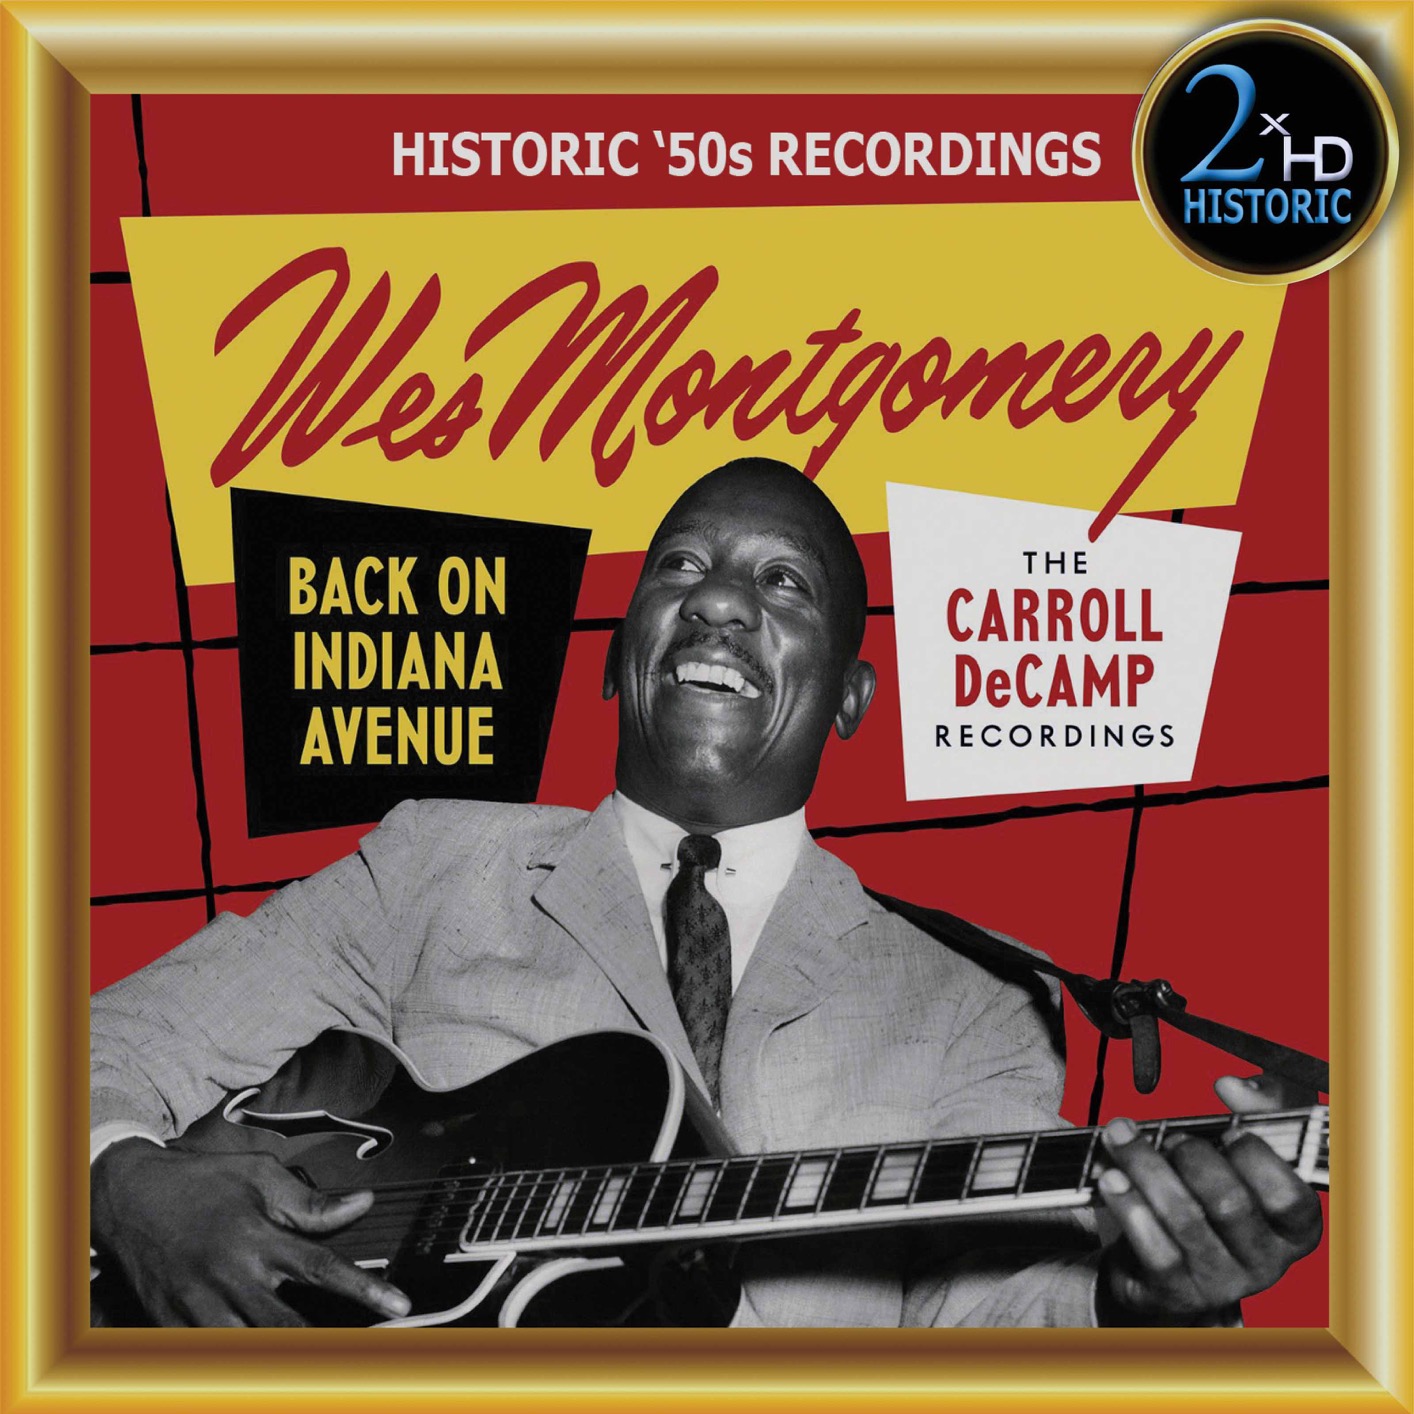 Wes Montgomery – Wes Montgomery,  Back on Indiana Avenue:  The Carroll DeCamp Recordings (Remastered) (2019) [Official Digital Download 24bit/48kHz]